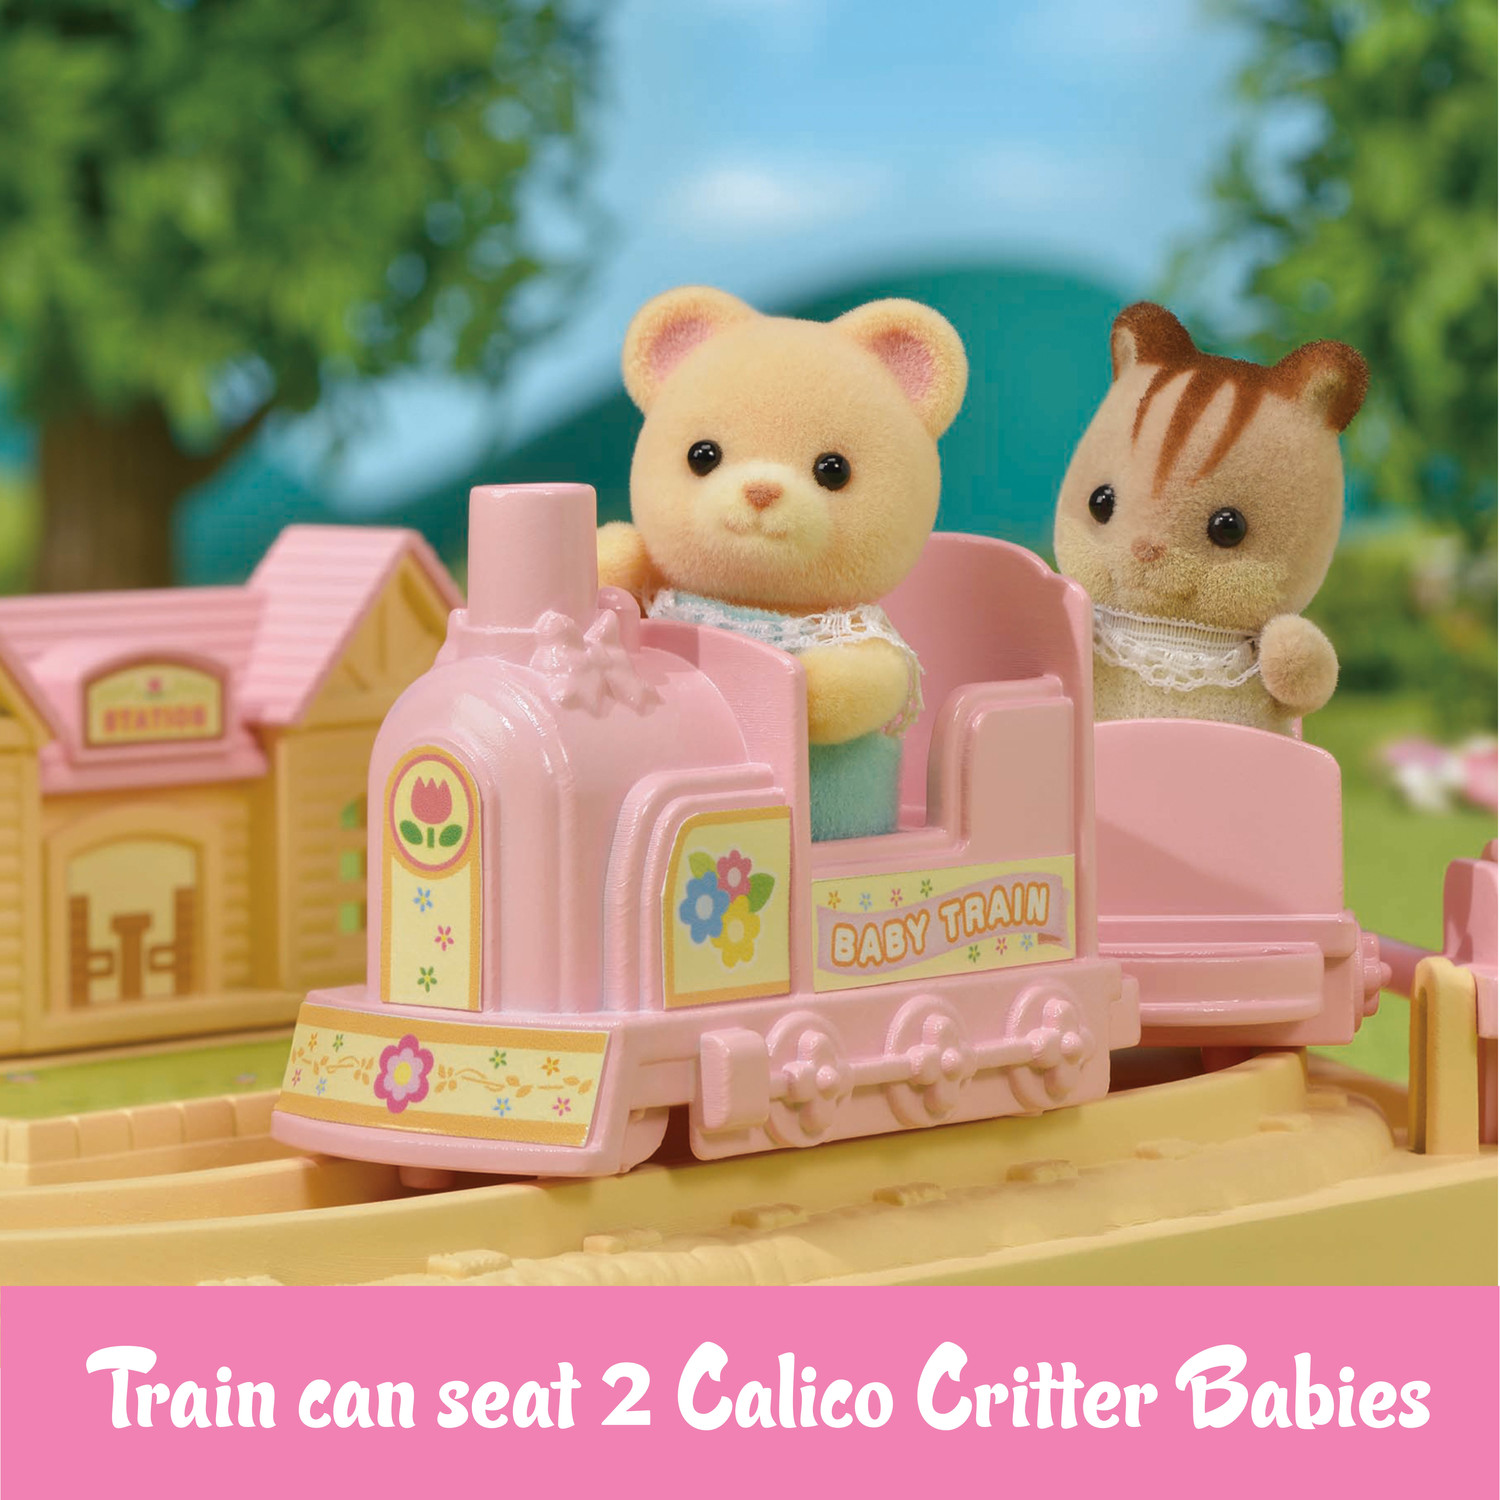 Calico Critters Baby Choo Choo Train, Dollhouse Playset with Figure - image 5 of 5